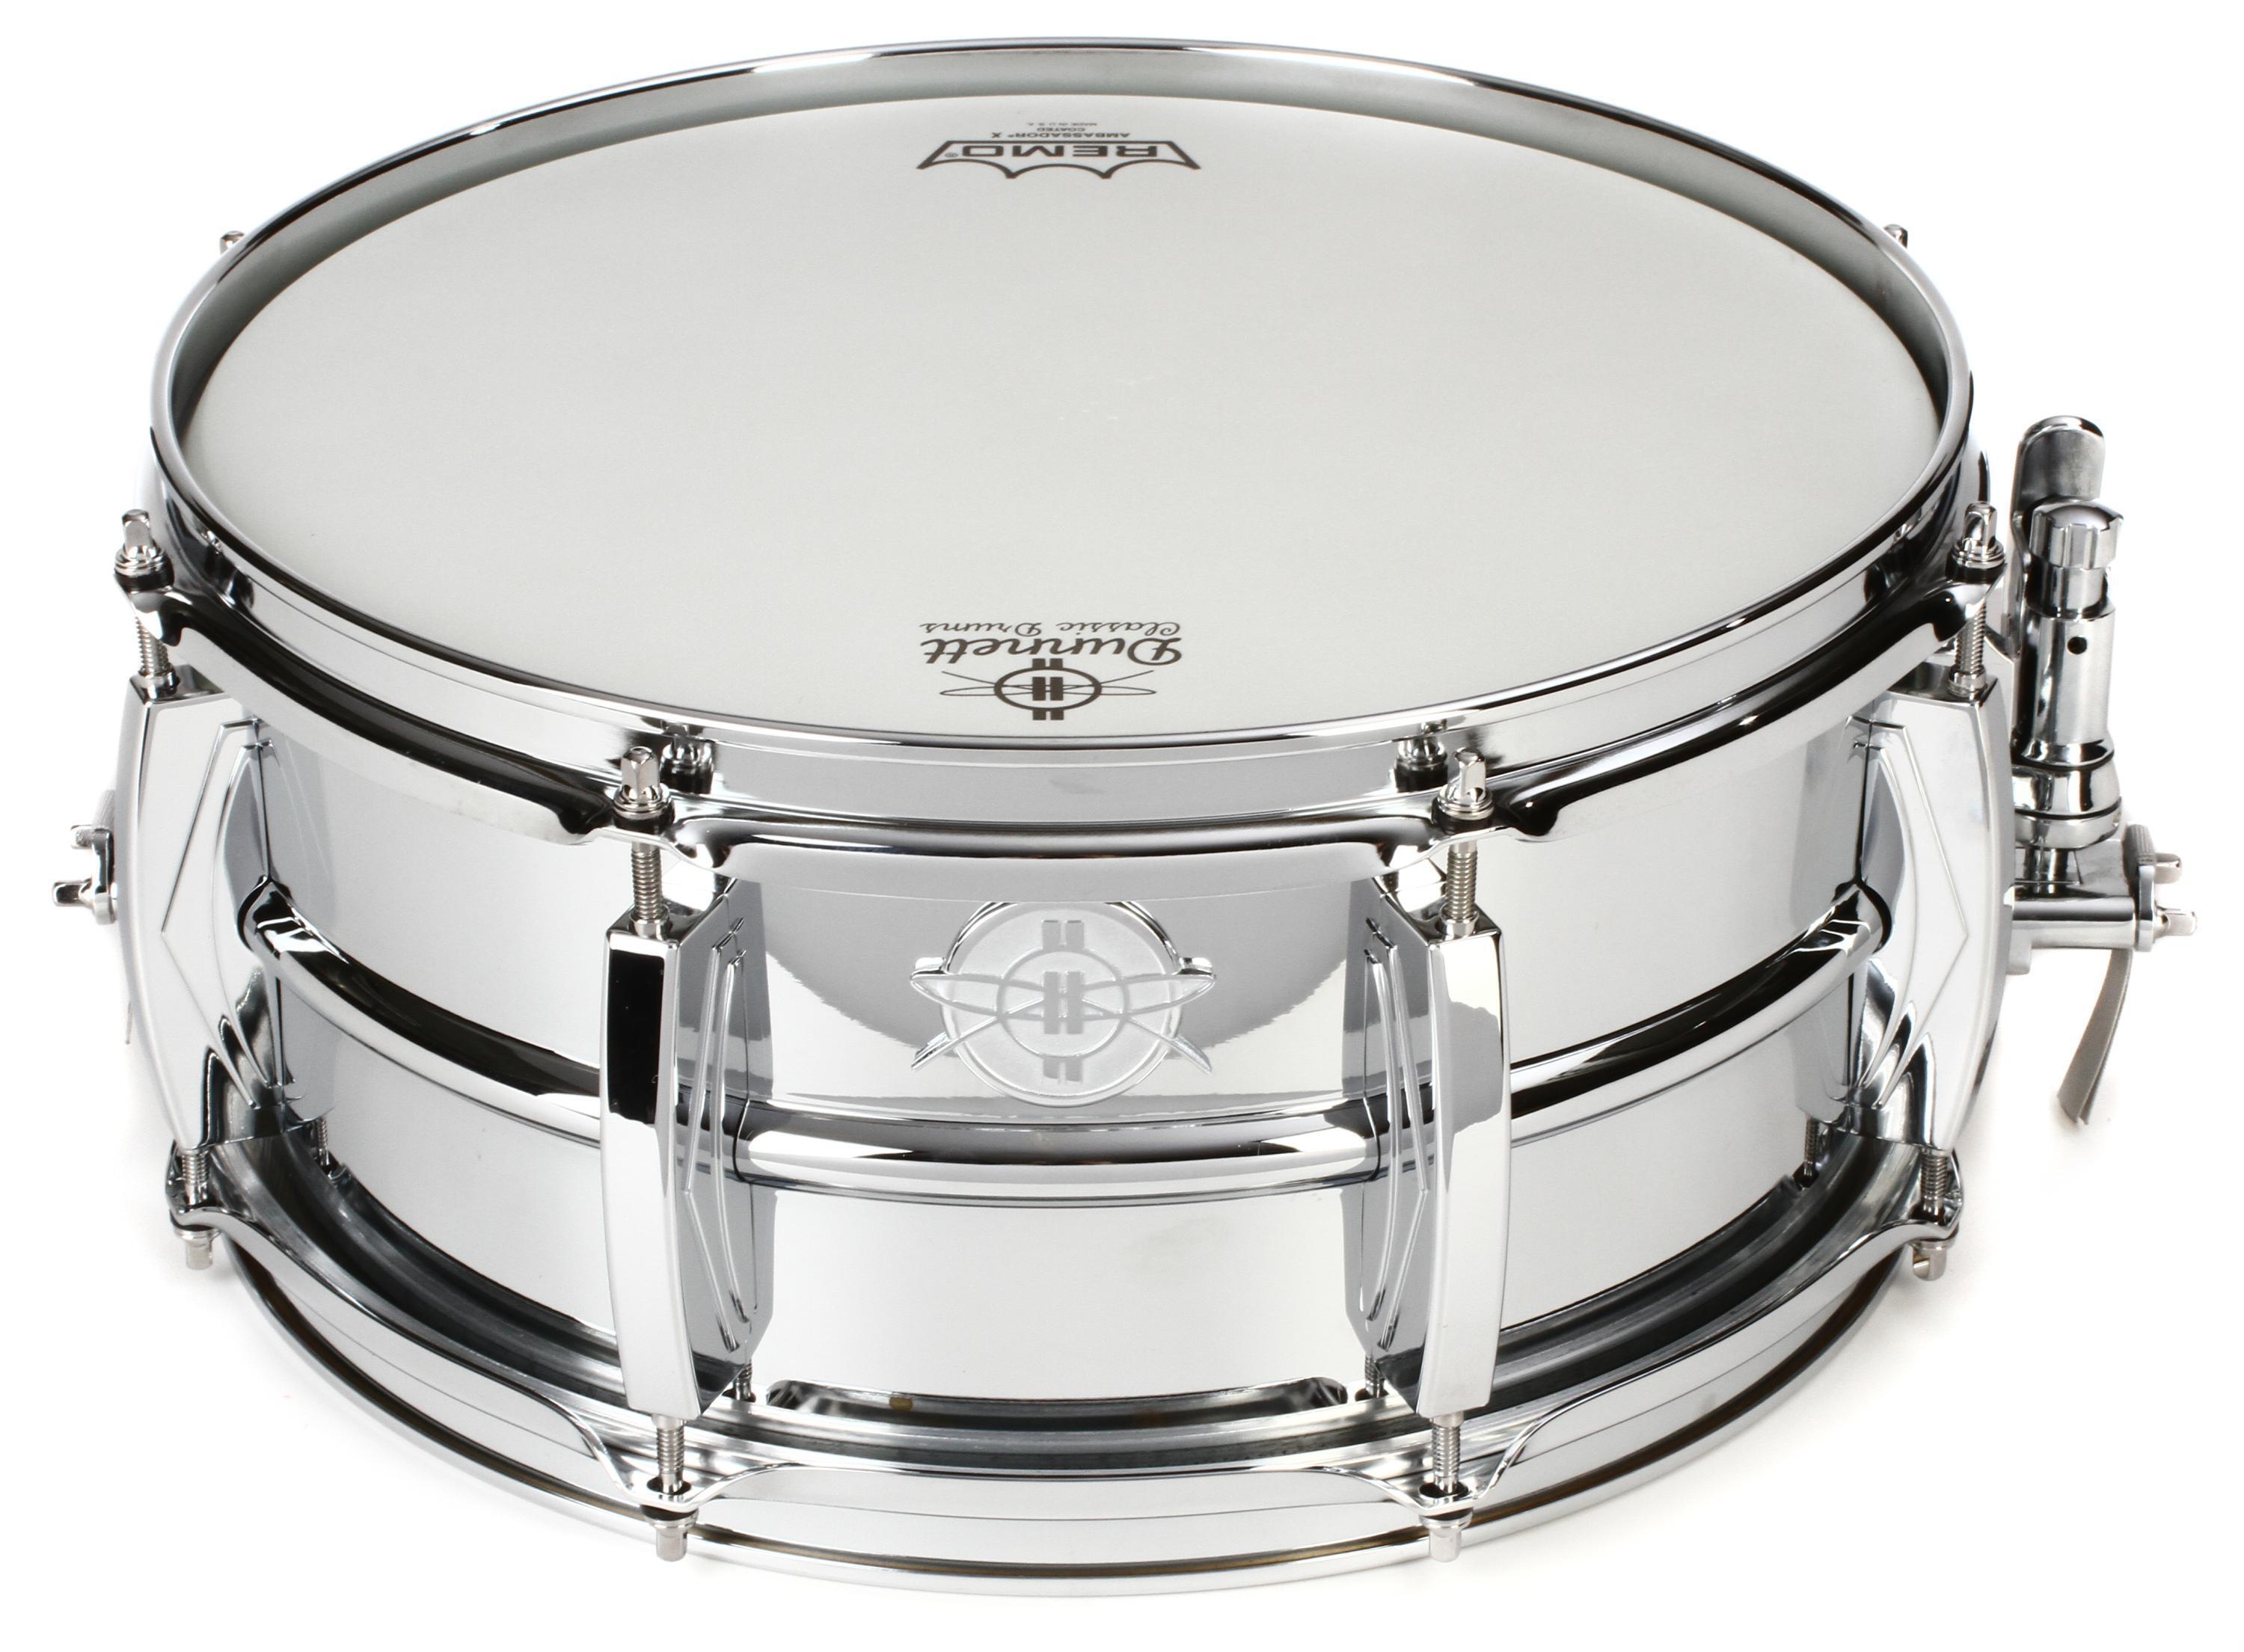 Classic Model 2N Brass Snare Drum - 6.5 x 14-inch - Chrome 